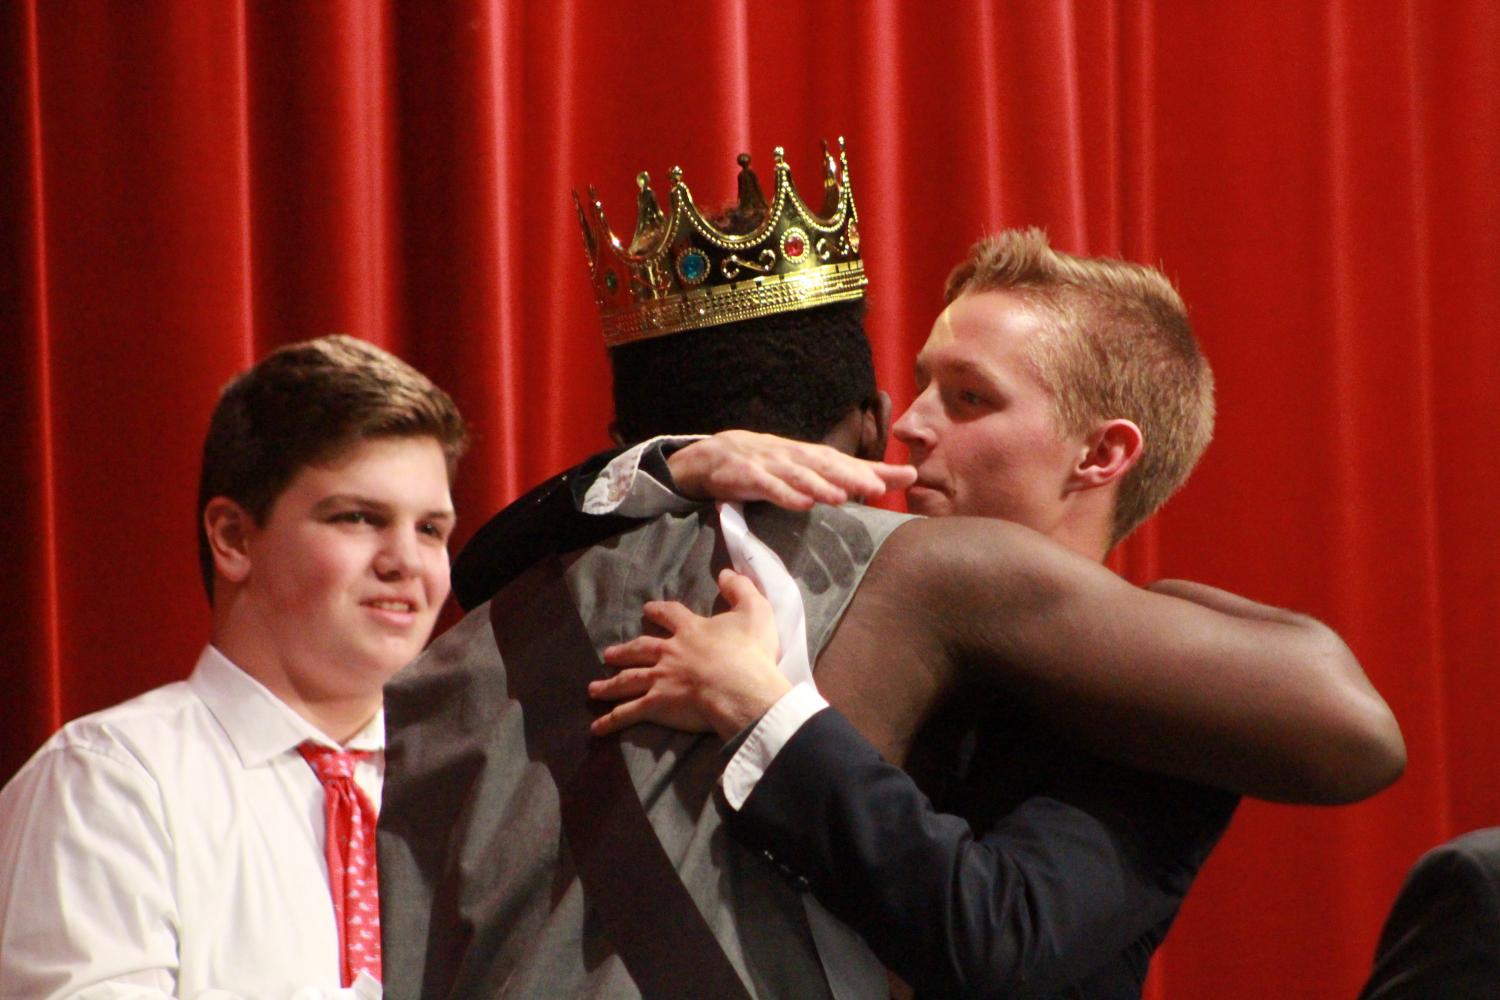 Senior Anthony Kristensen hugs senior Bryce Perry after Perry was awarded first place. Mr. FHN ended up raising over $4,500 all the proceeds went towards different charities in need. Not only did this event provide entertainment to students and family members of FHN, but also supported the surrounding community through donations. 